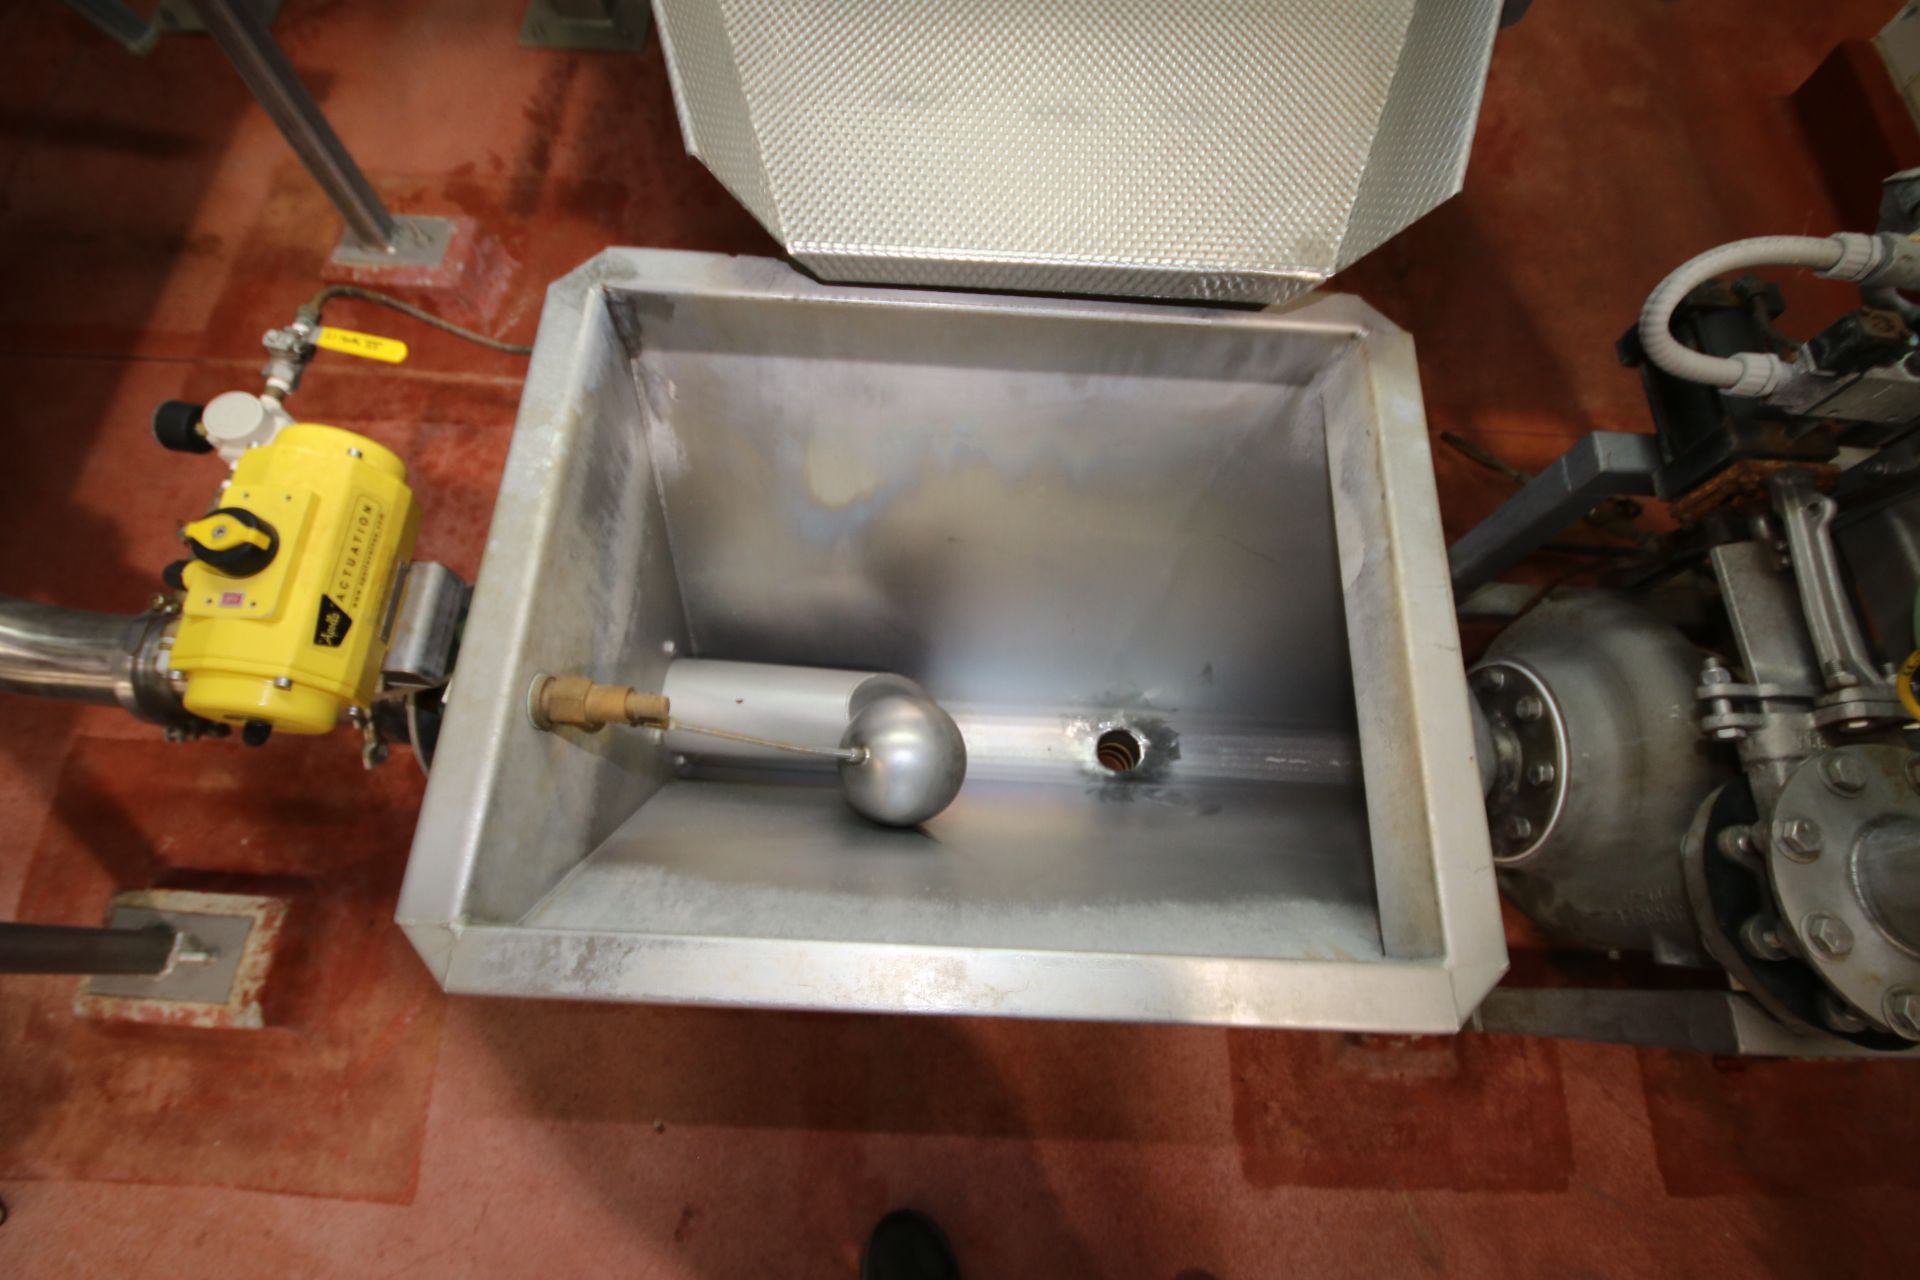 Key Hydro - Flo Food Pumping System, with 24" W x 19" L x 19" D Tank, 4" Line Connectors, Cornell - Image 2 of 4